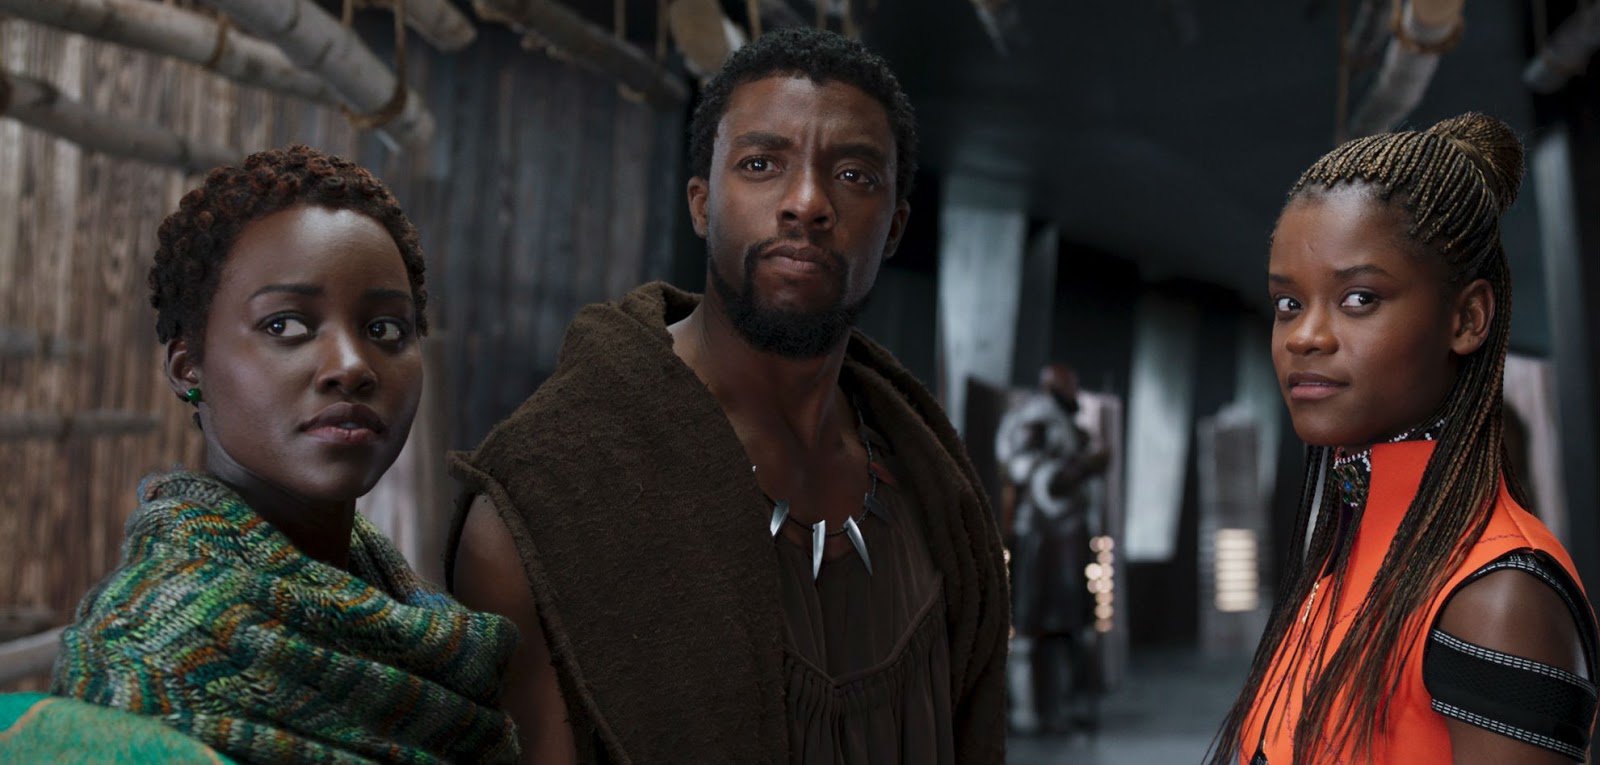 MOVIES: Black Panther - Review